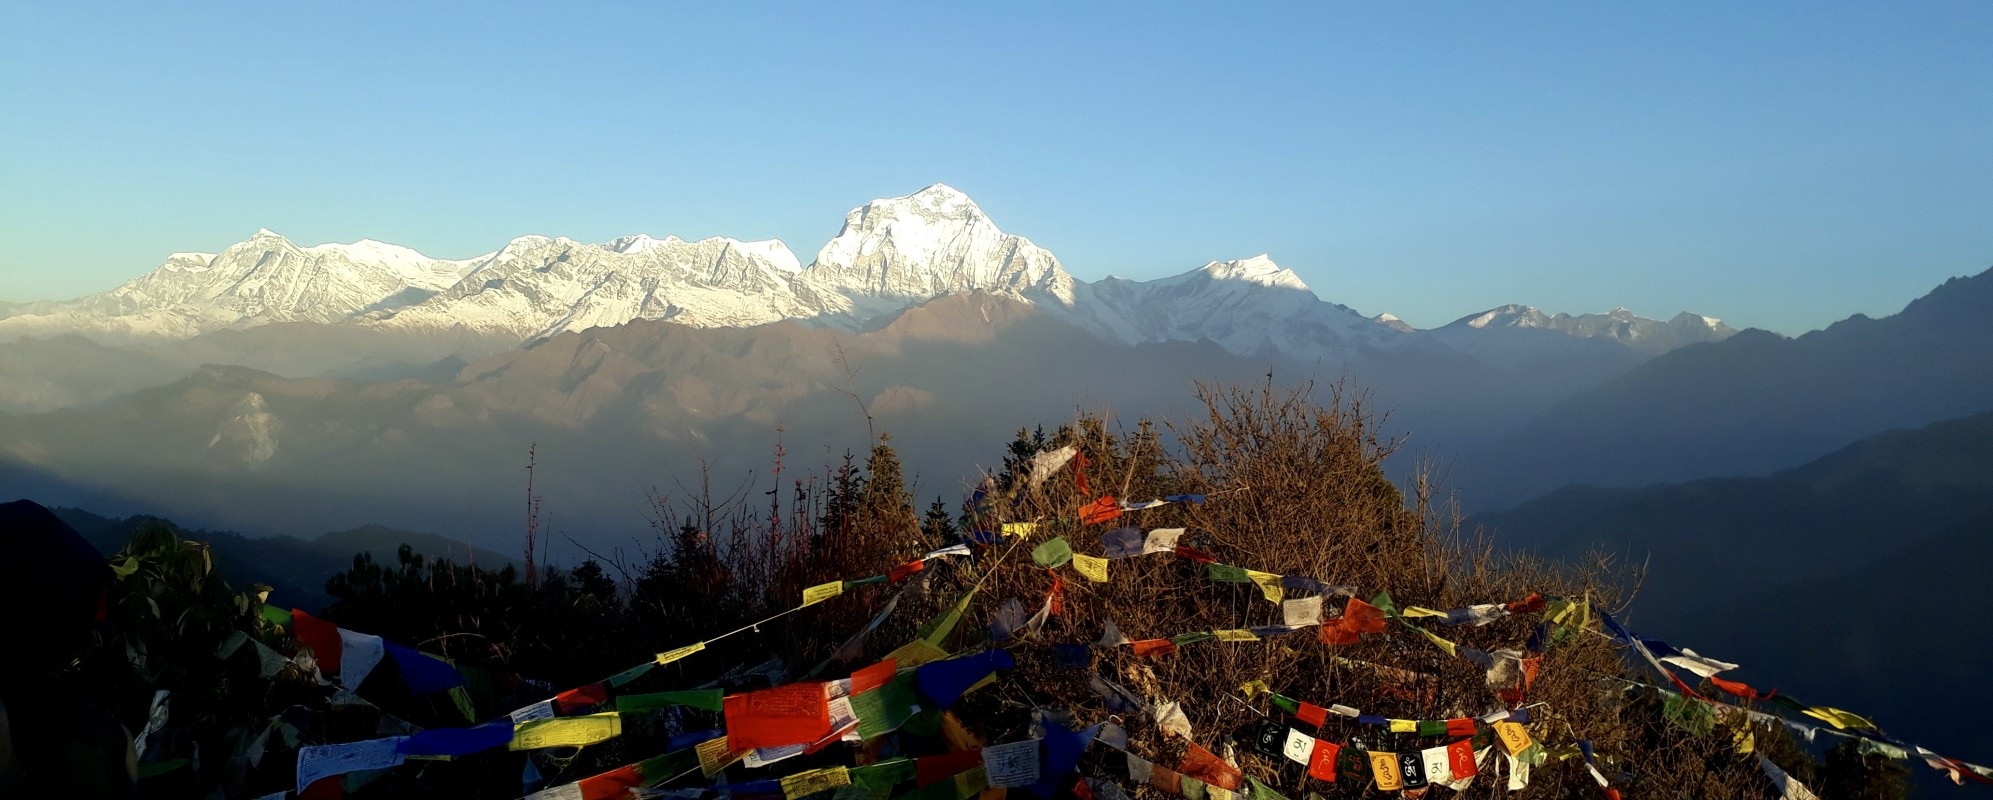 Poon Hill and Mulde Viewpoints Trekking